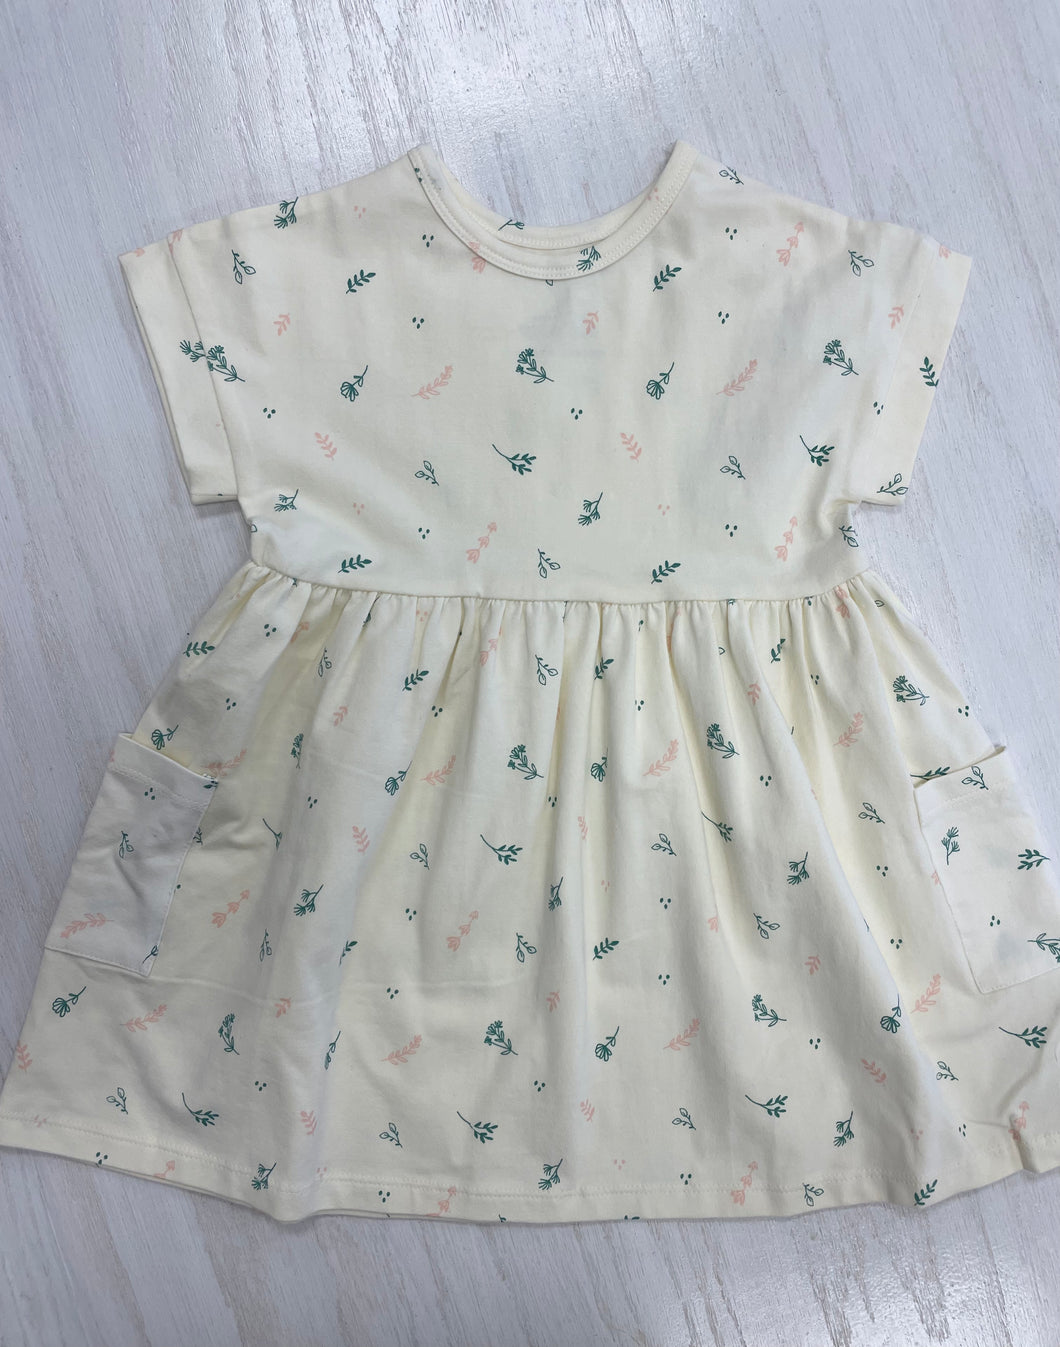 Cream colored girls' dress with quality, breathable cotton and dainty pattern.